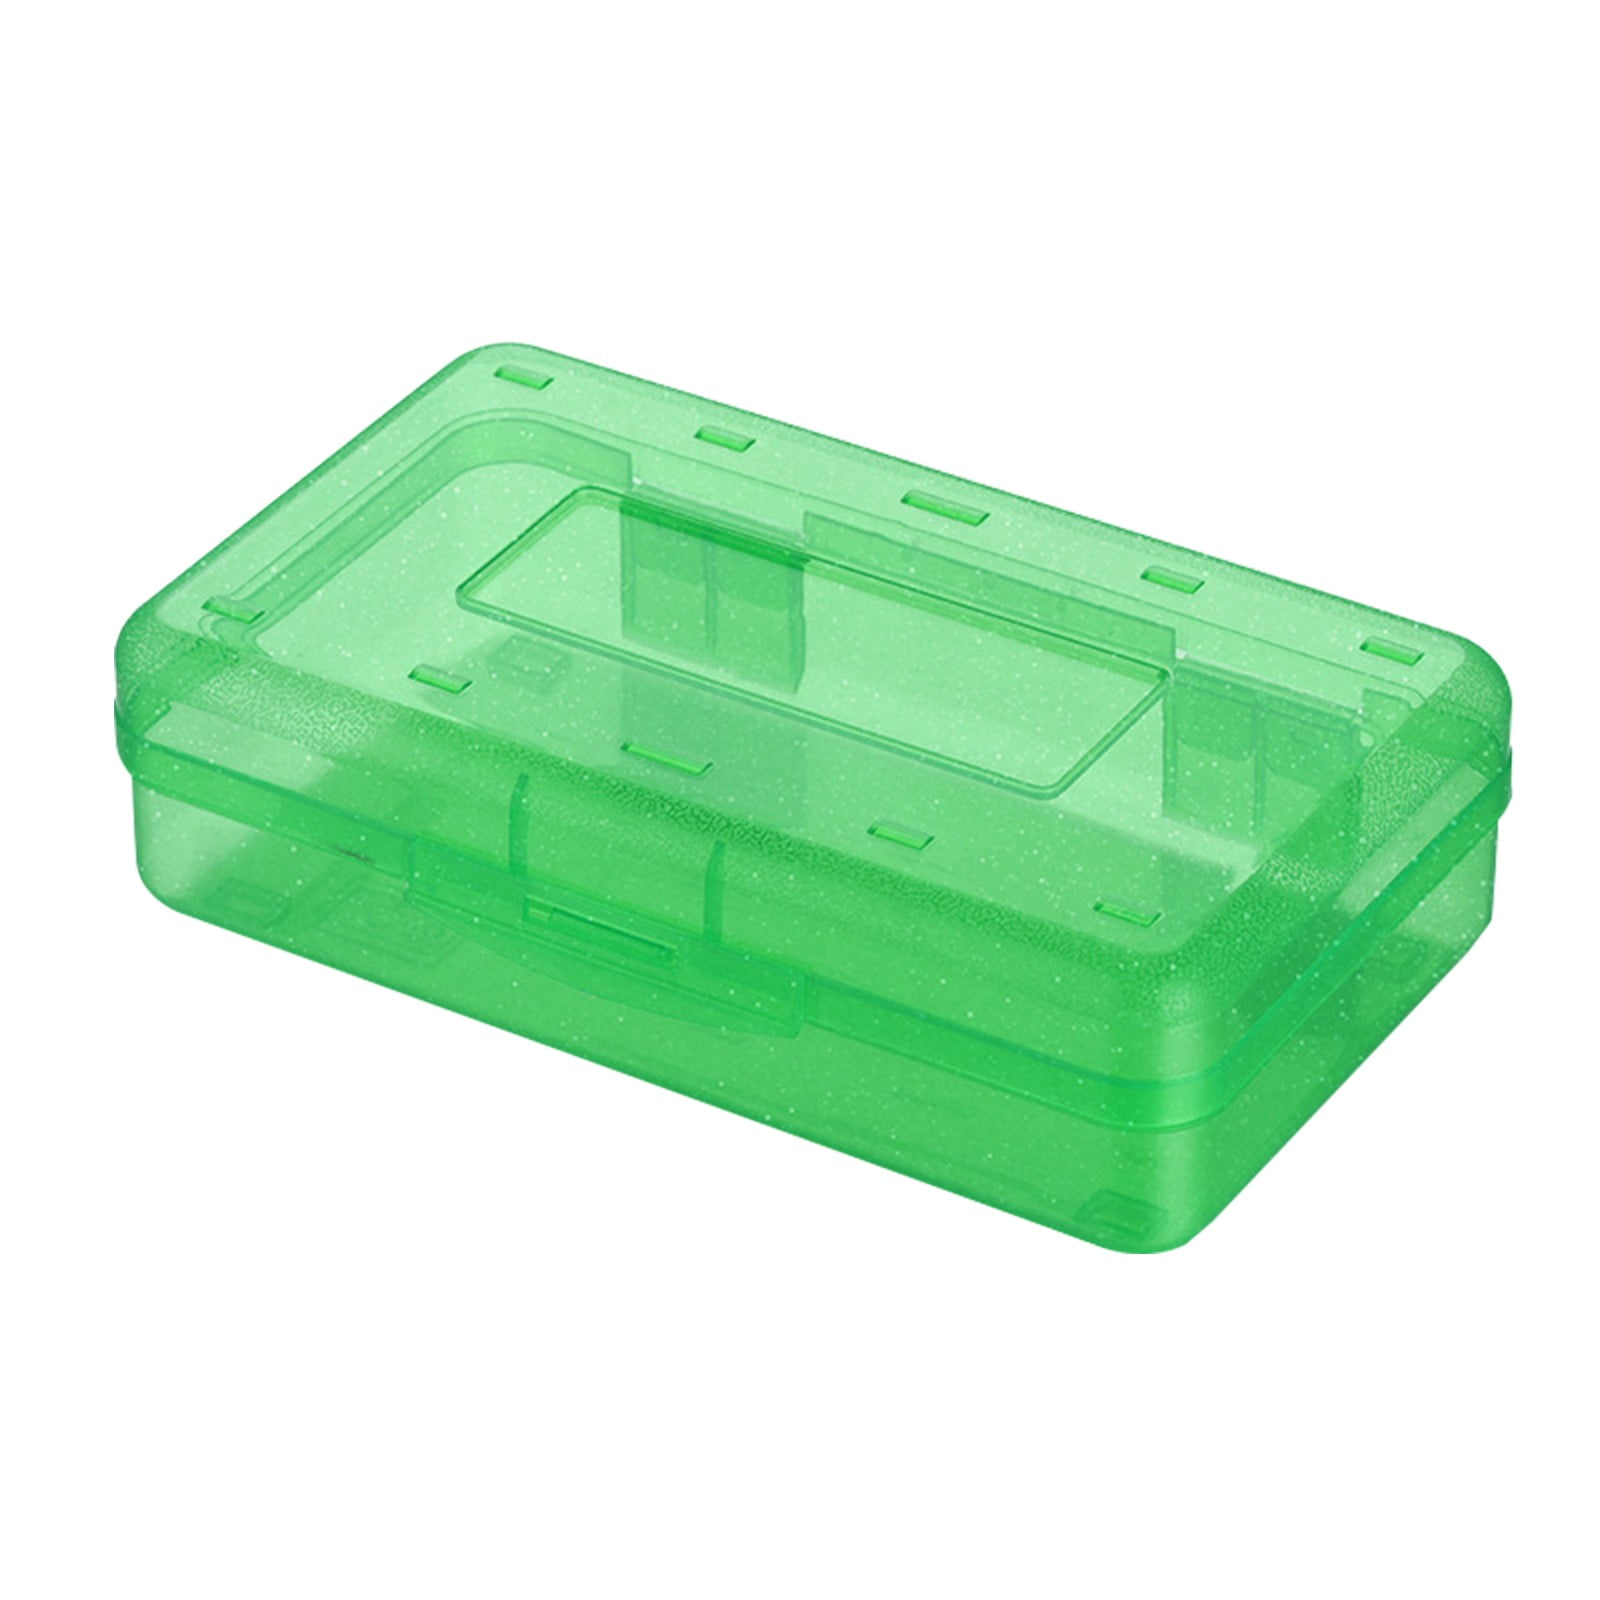 Penkiiy Plastic Large Capacity Pencil Boxes Clear Boxes With Lid